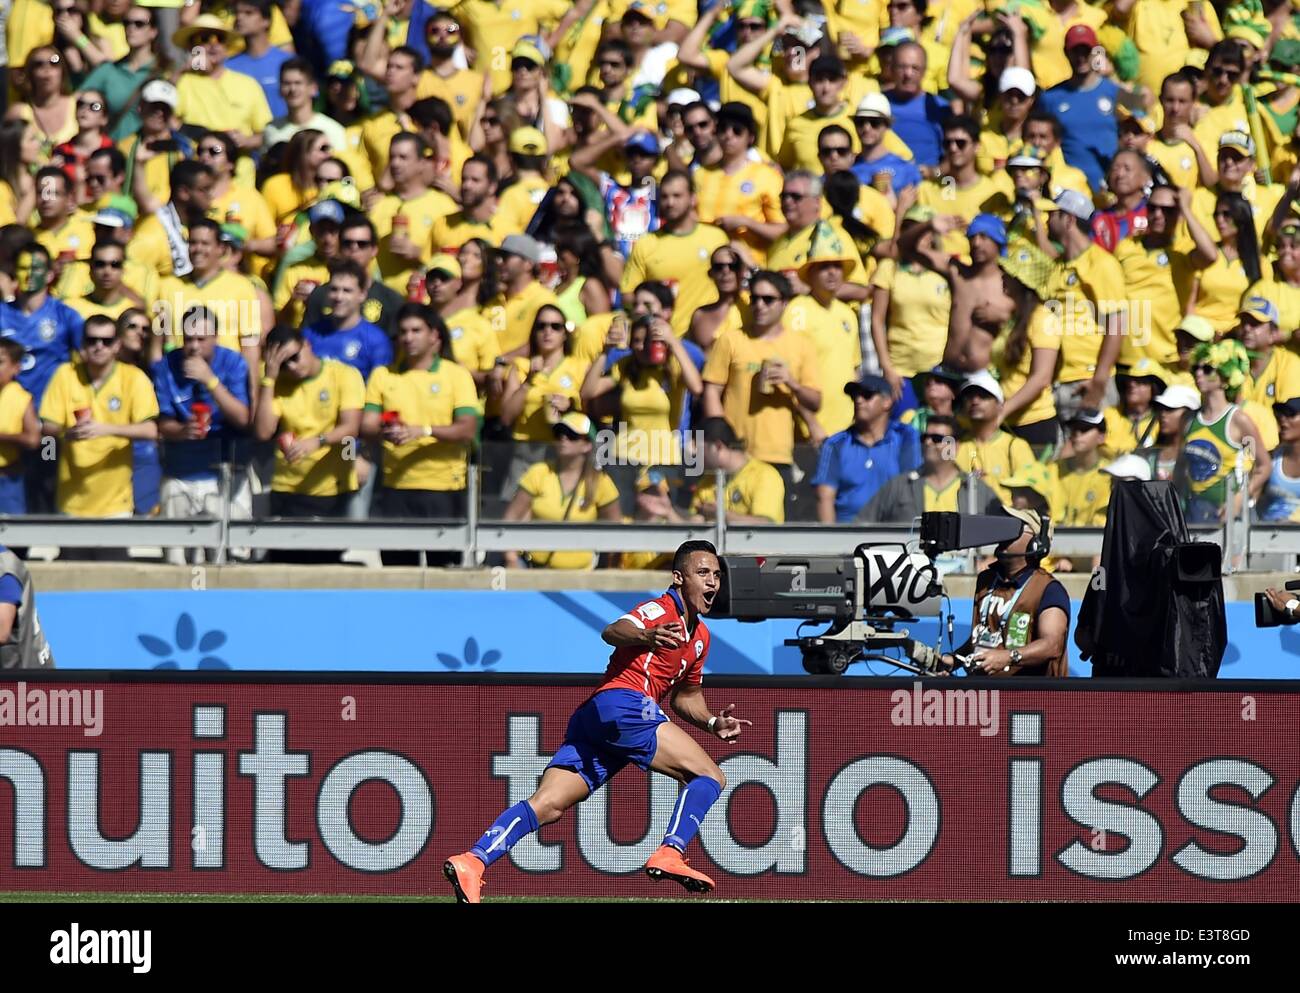 Belo Horizonte, Brazil. 28th June, 2014. Chile's Alexis Sanchez celebrates a goal during a Round of 16 match between Brazil and Chile of 2014 FIFA World Cup at the Estadio Mineirao Stadium in Belo Horizonte, Brazil, on June 28, 2014. Credit:  Qi Heng/Xinhua/Alamy Live News Stock Photo